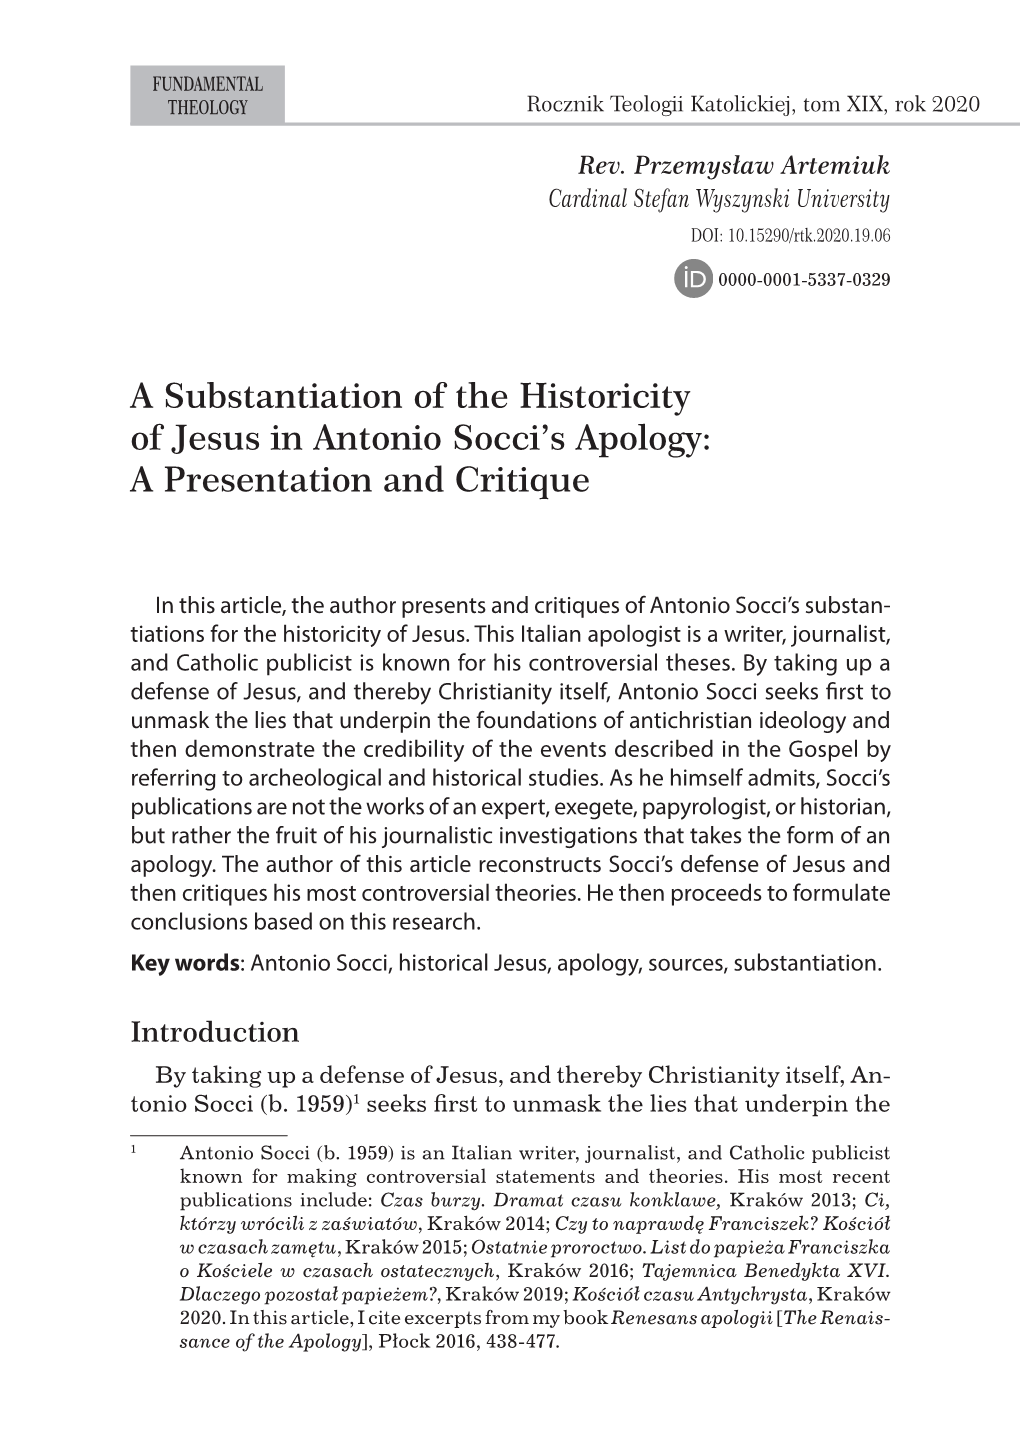 A Substantiation of the Historicity of Jesus in Antonio Socci's Apology: A